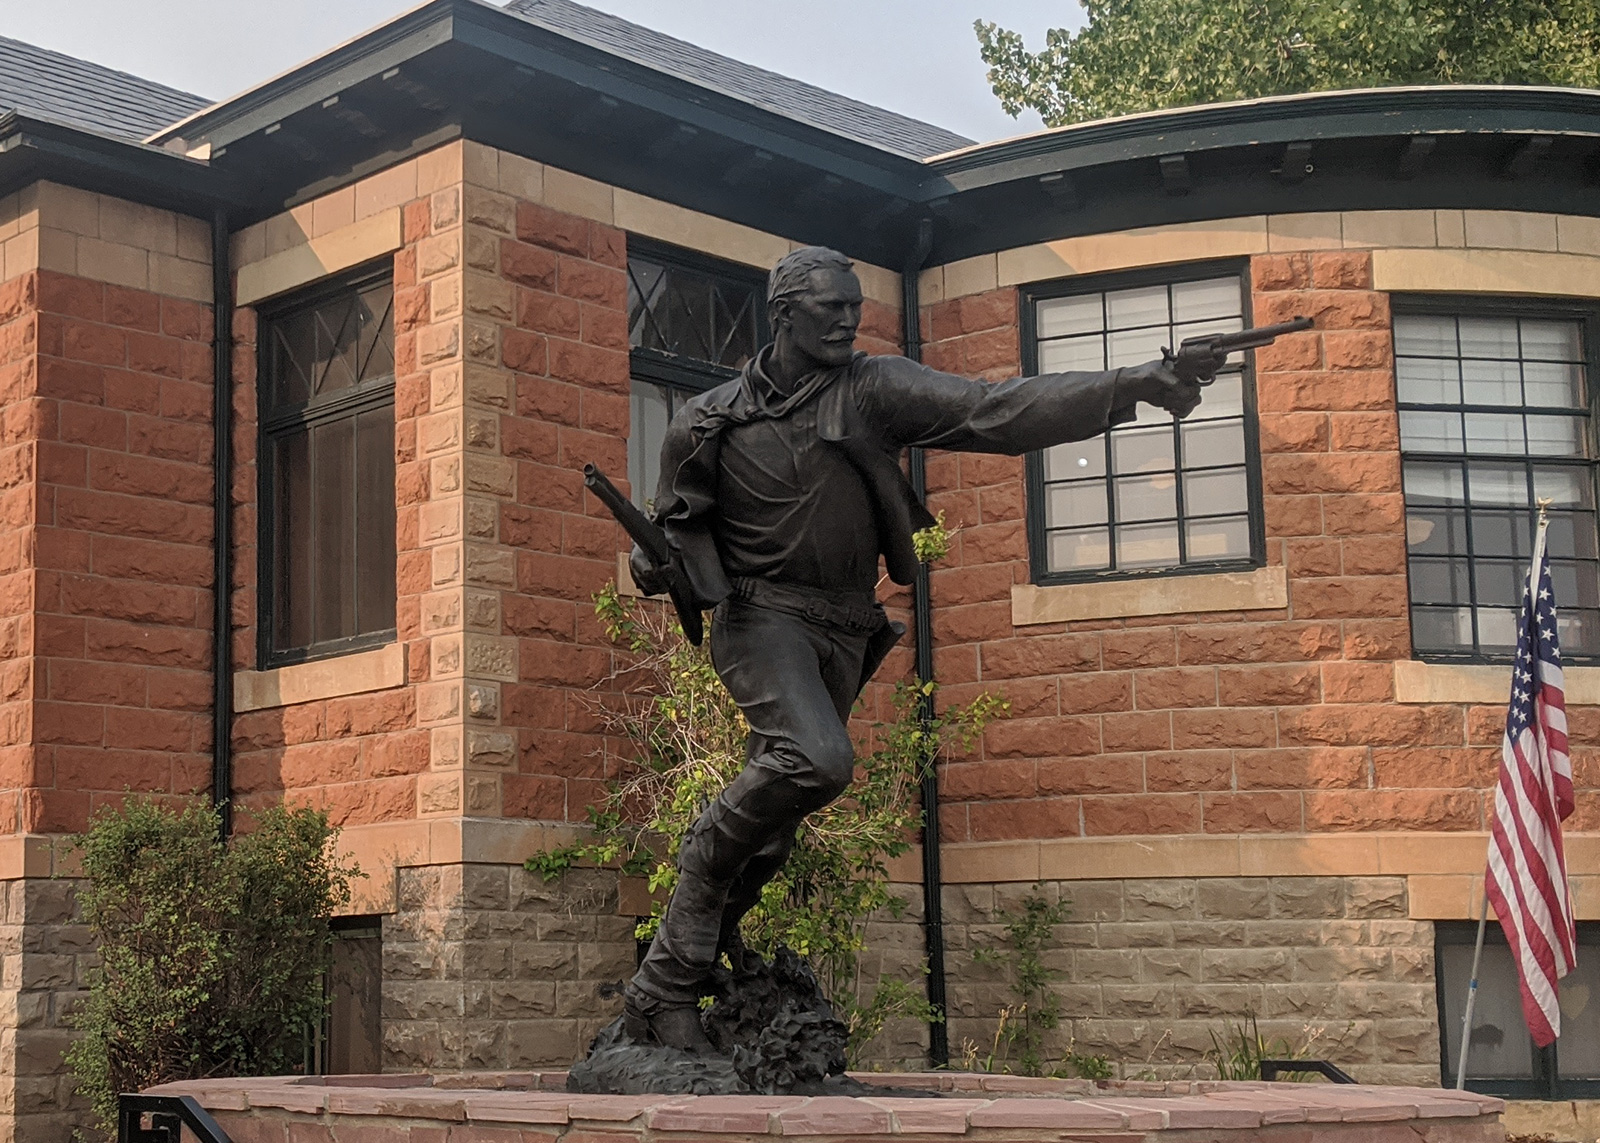 A statute of an outlaw in front of a historic brick building.